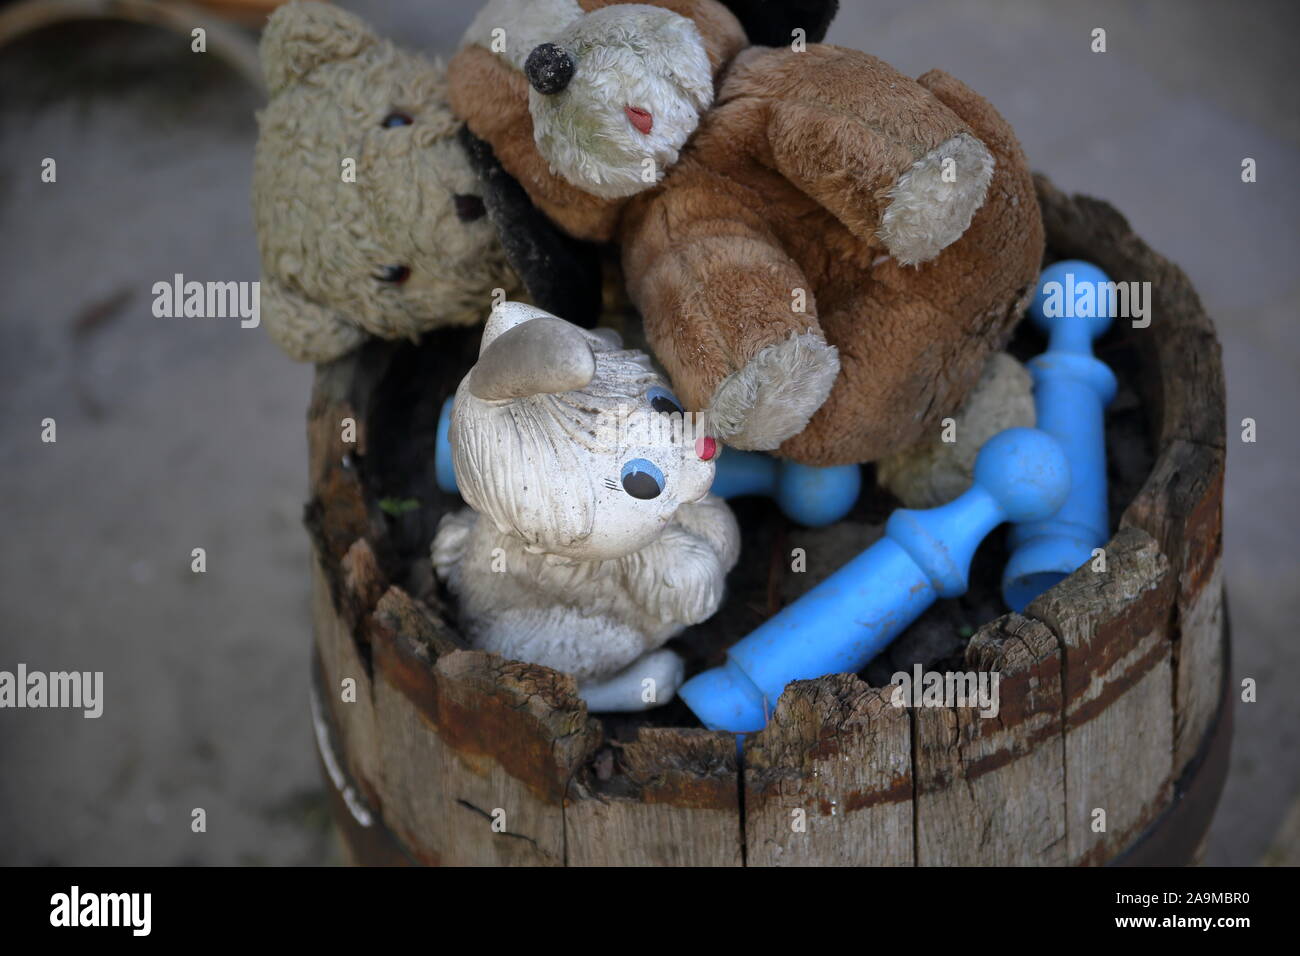 Old dirty abandoned plush toys like teddy bears, blue pieces of bowling, in wooden barrel, thrown away like waste, top view. Stock Photo